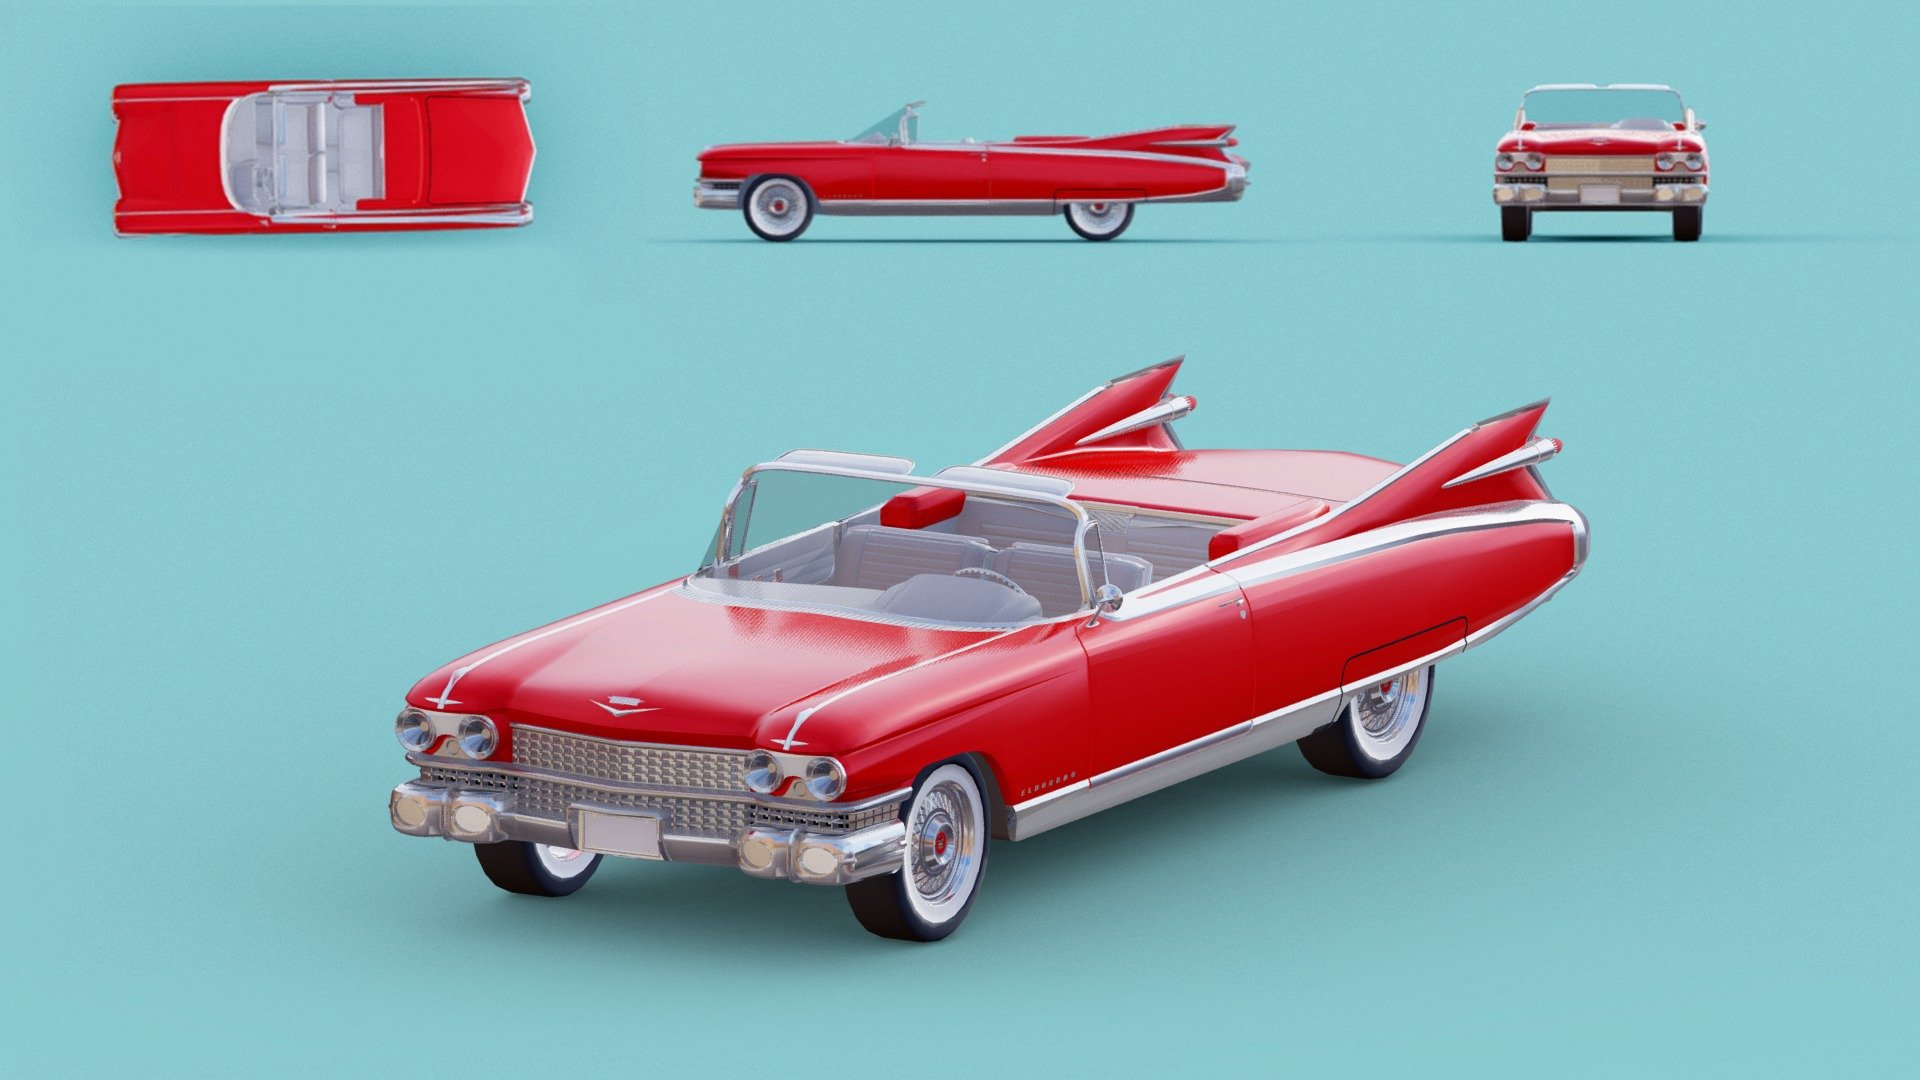 Customer reviews are extremely important for the development and improvement of services. If you purchased a 3D model in my store, I encourage you to share your opinion by leaving a rating (stars). This will help me understand your expectations and adapt
 offer to suit your needs. Thank you for your time and support! - 3d model CADILLAC ELDORADO BIARRITZ 1959 - Buy Royalty Free 3D model by zizian 3d model